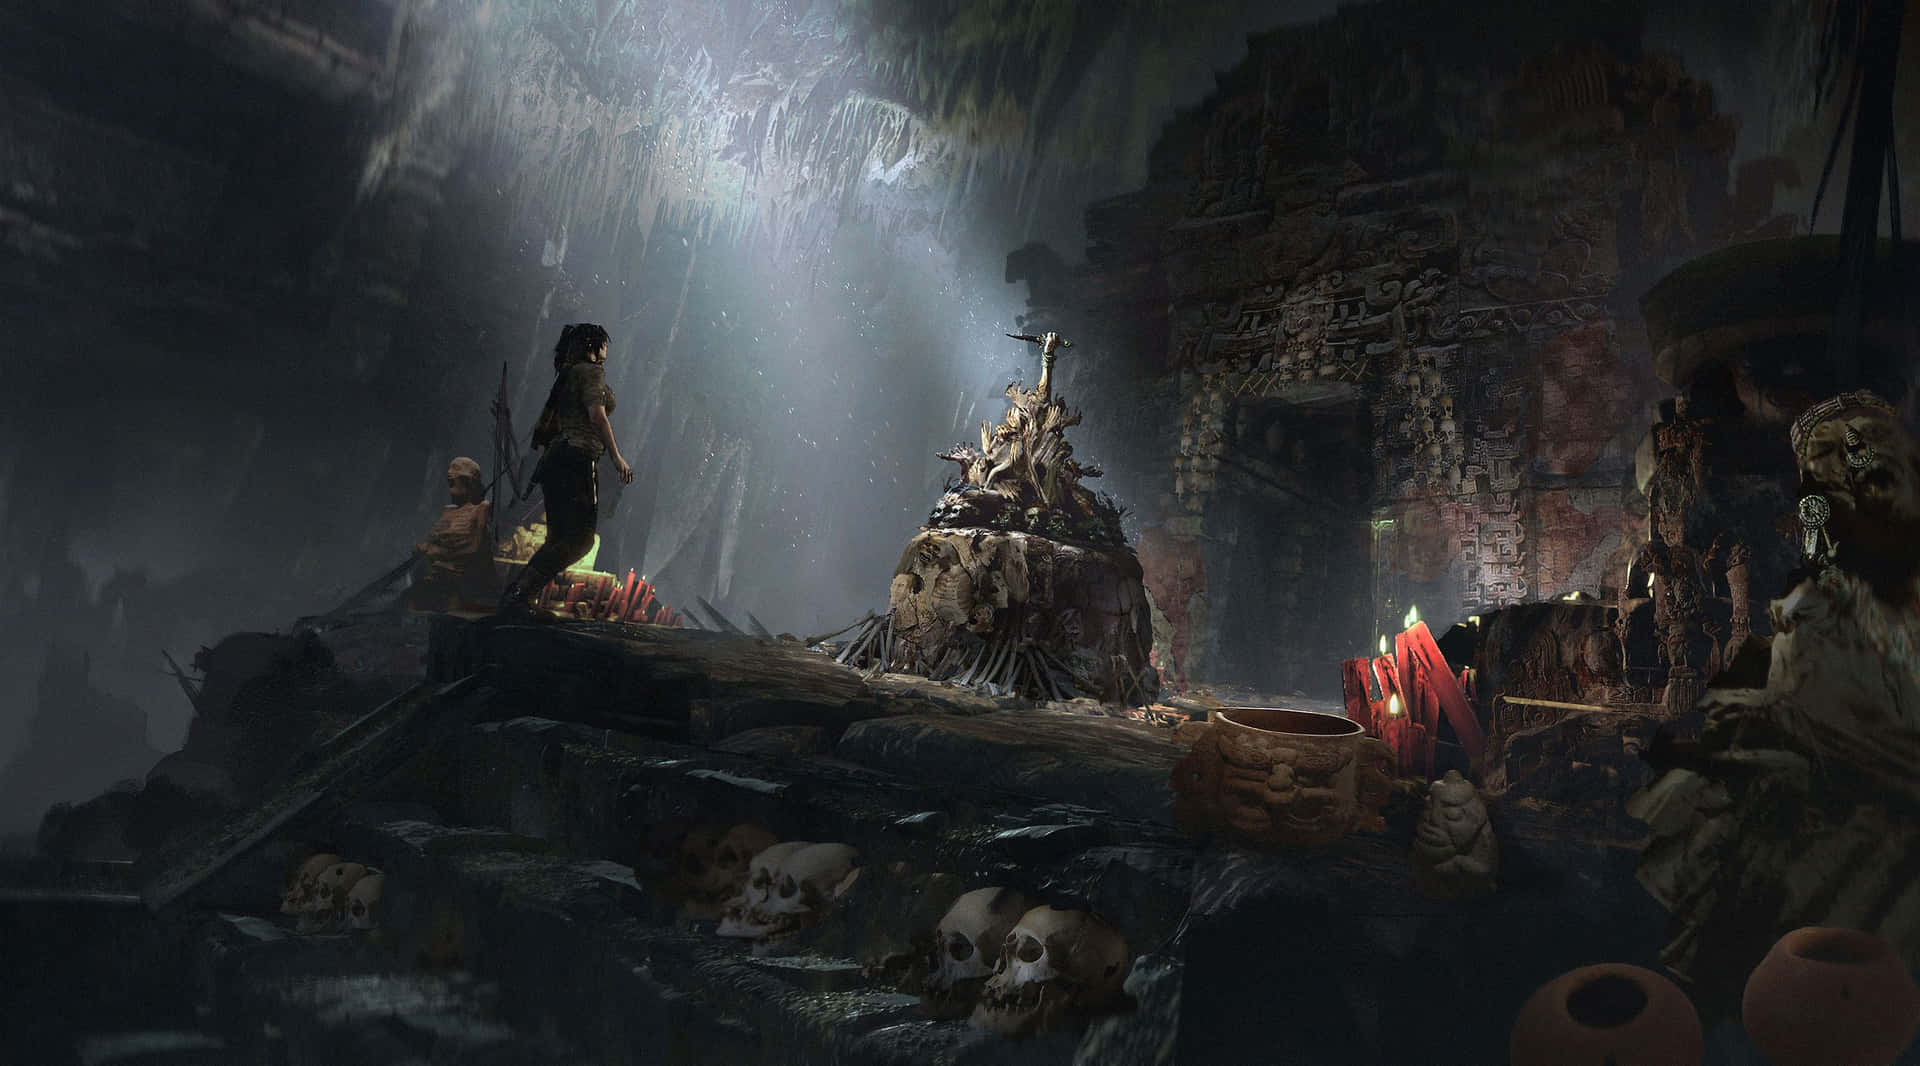 Explore Hidden Tombs And Hunt For Secrets In The Epic Adventure Of Shadow Of The Tomb Raider